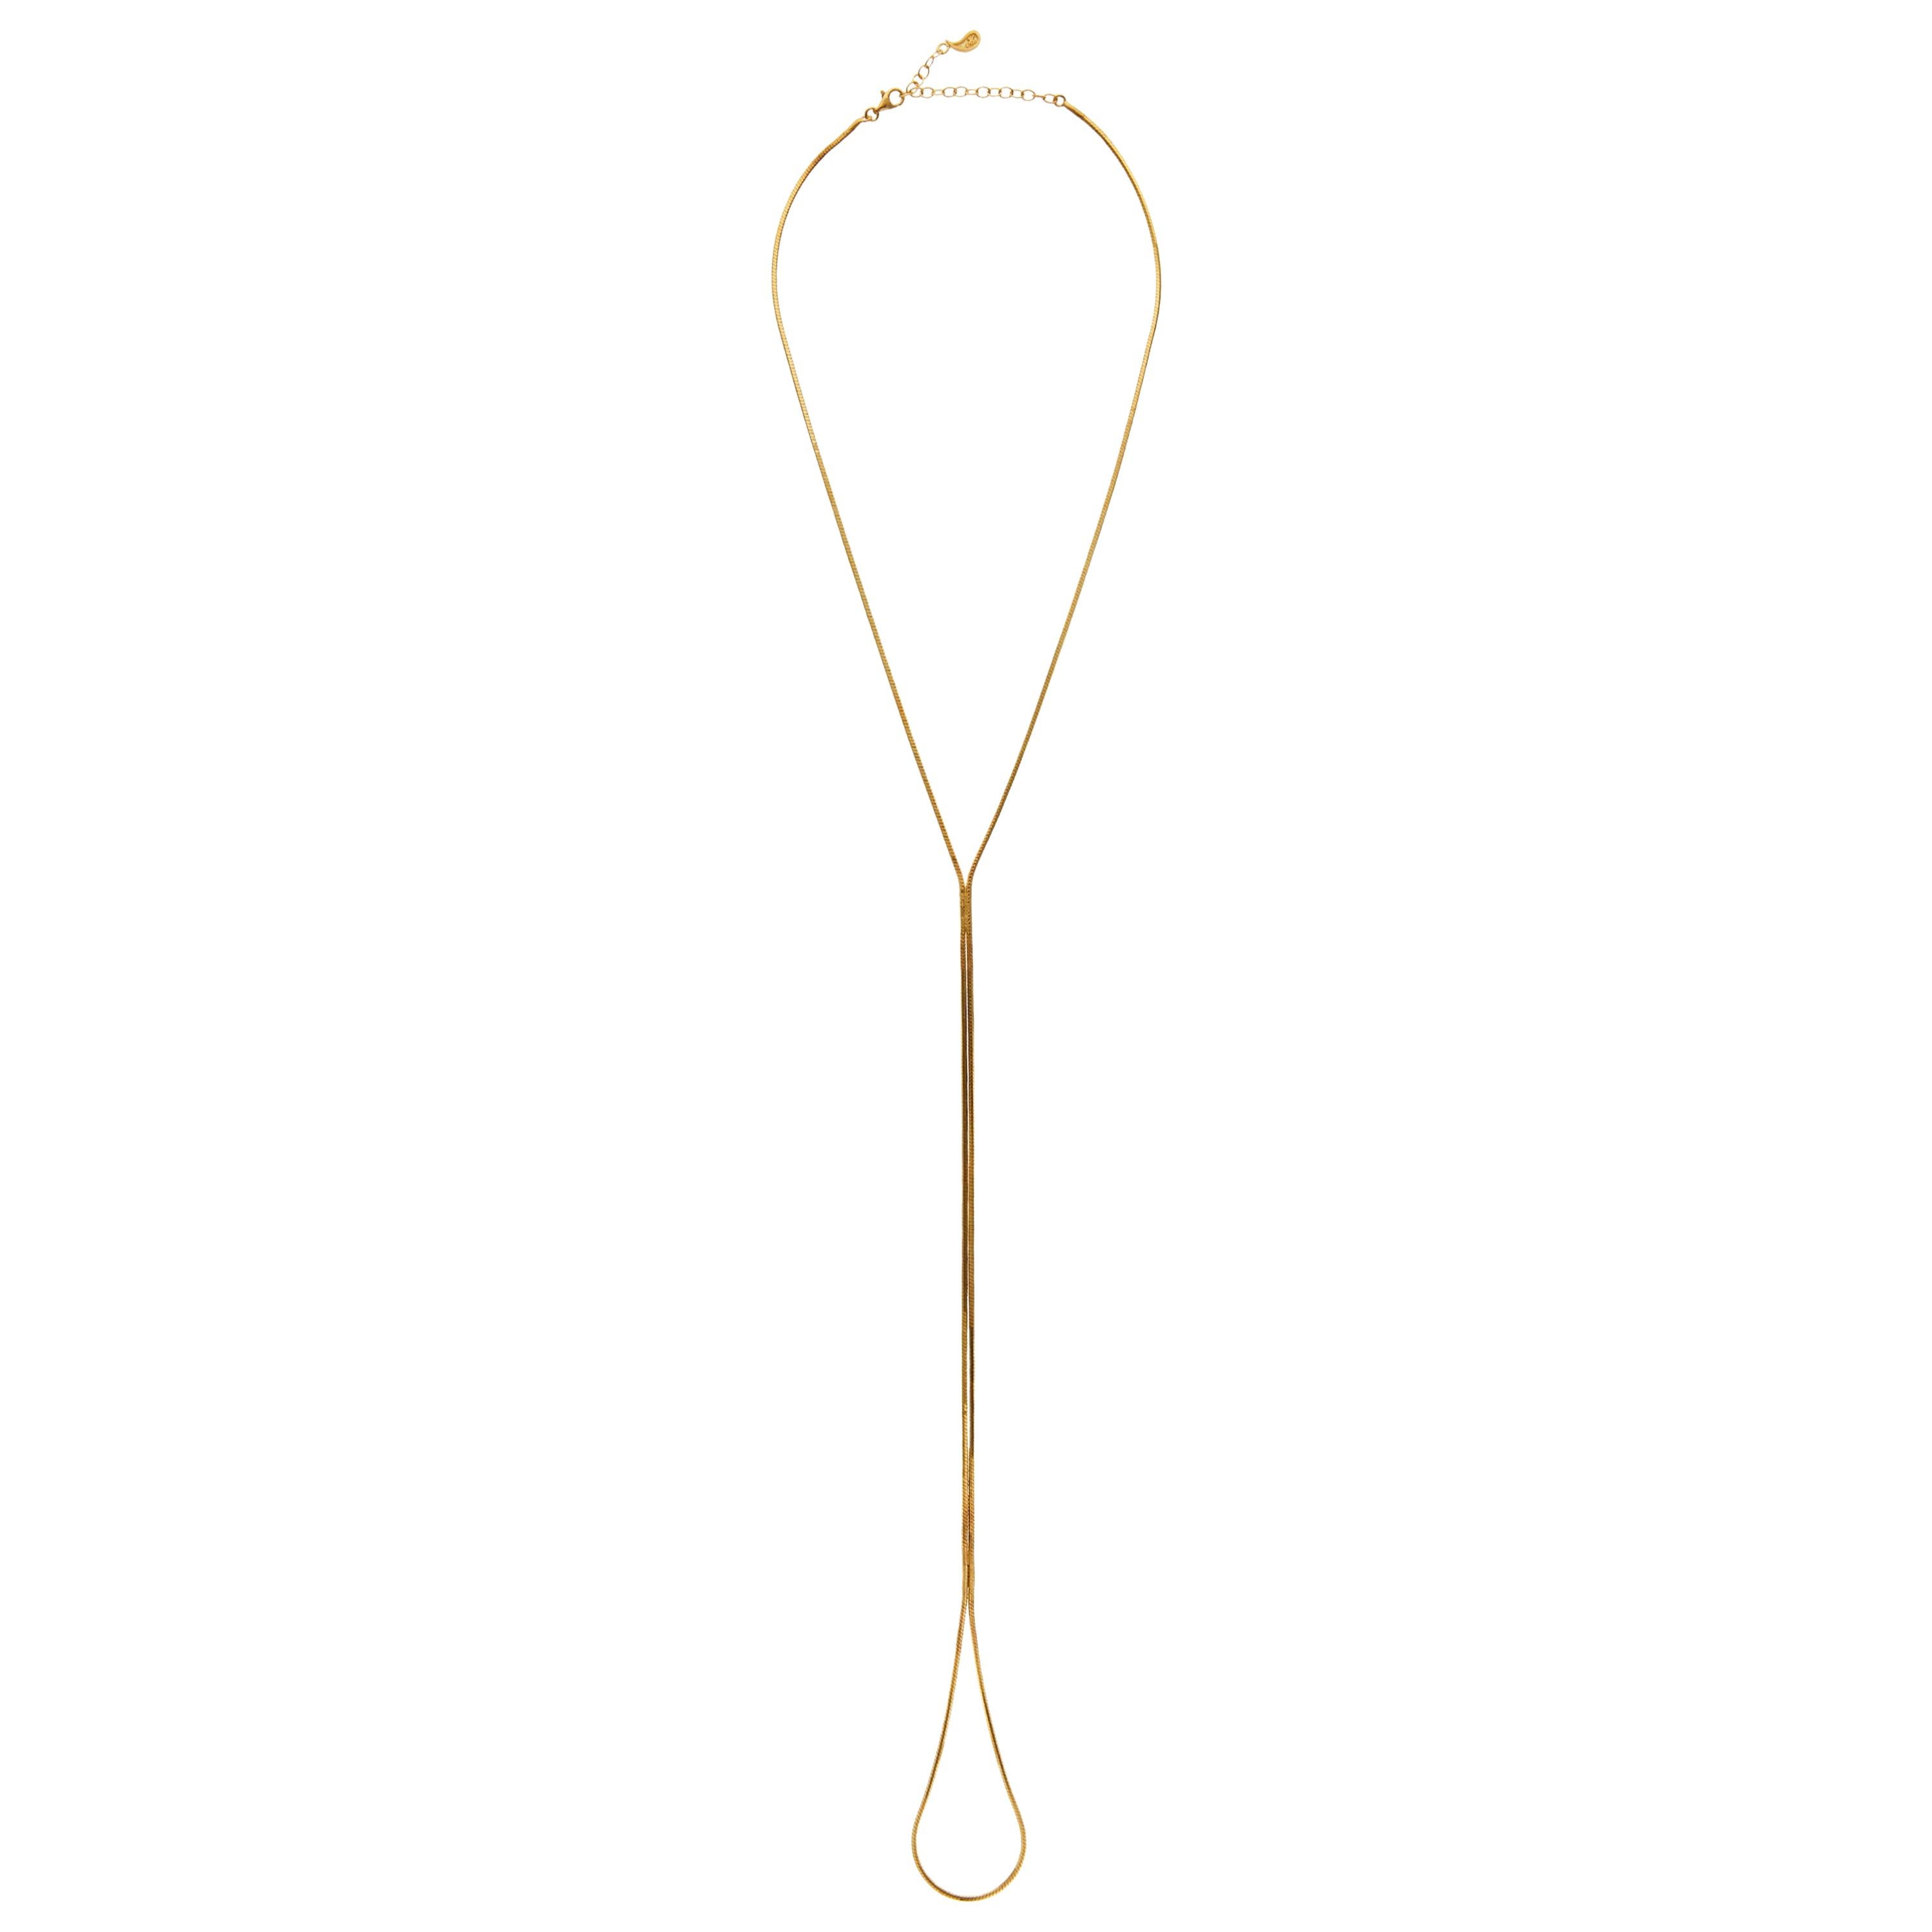 Necklace Lariat Snake Chain Minimal Long Liquid 18K Gold-Plated Greek Jewelry For Sale